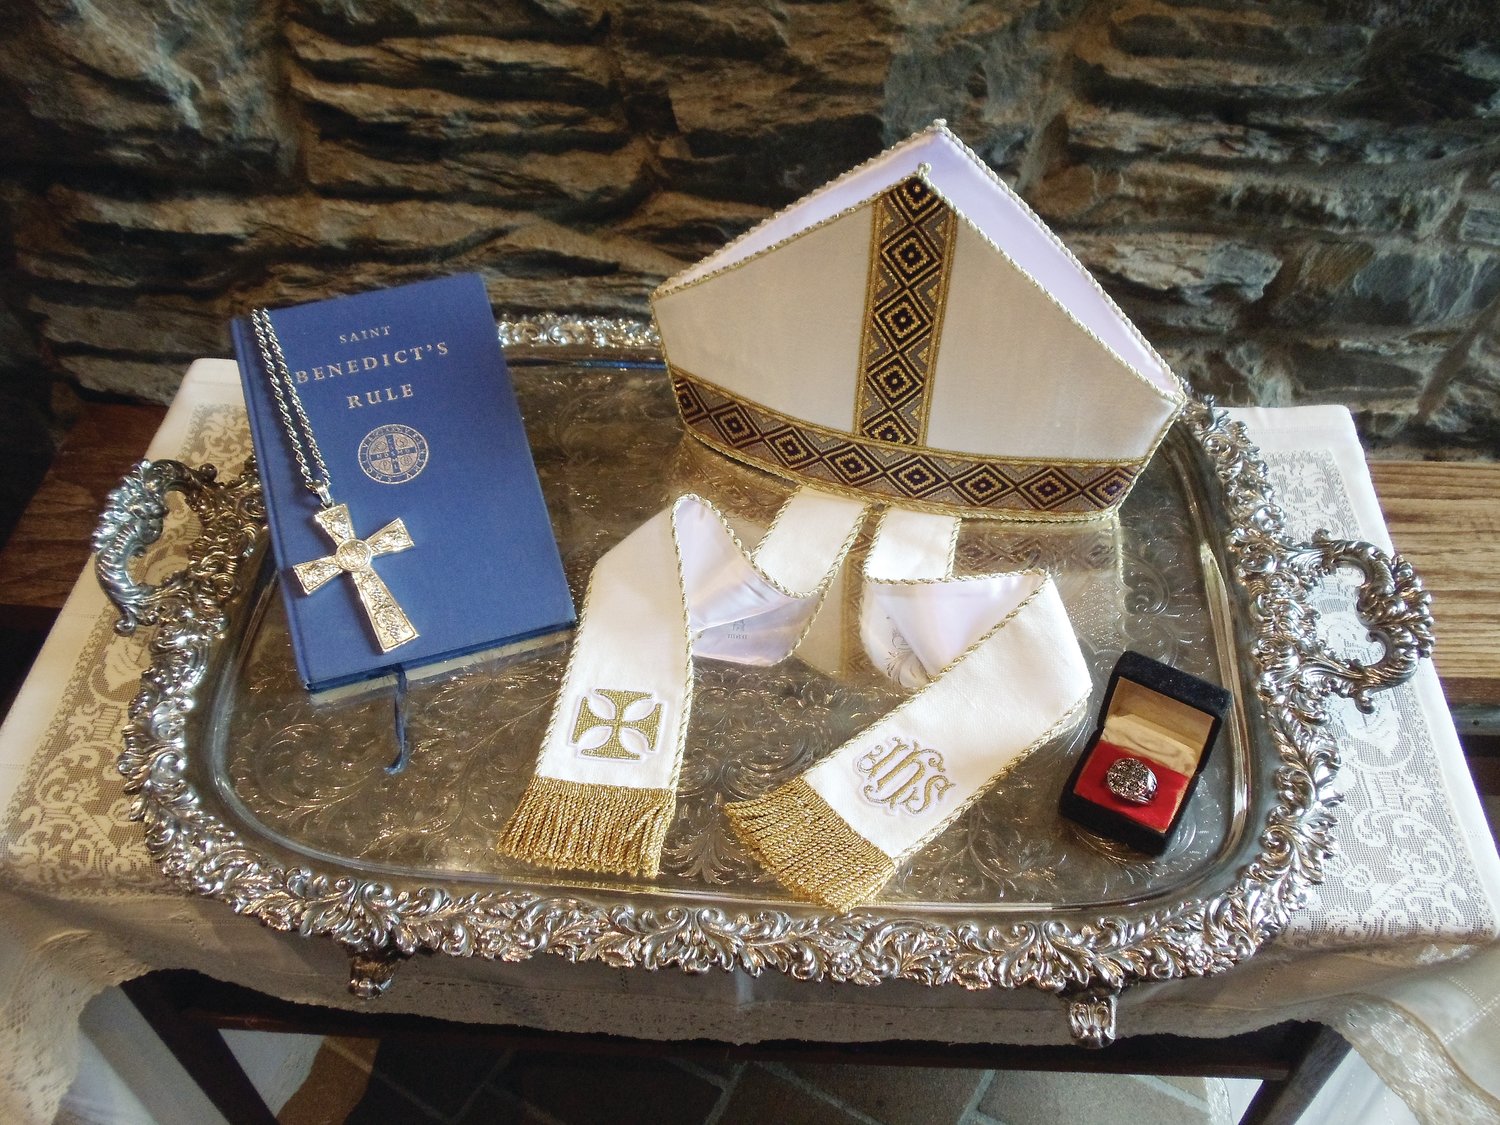 A tray containing items of the pontificalia, or pontifical insignia.